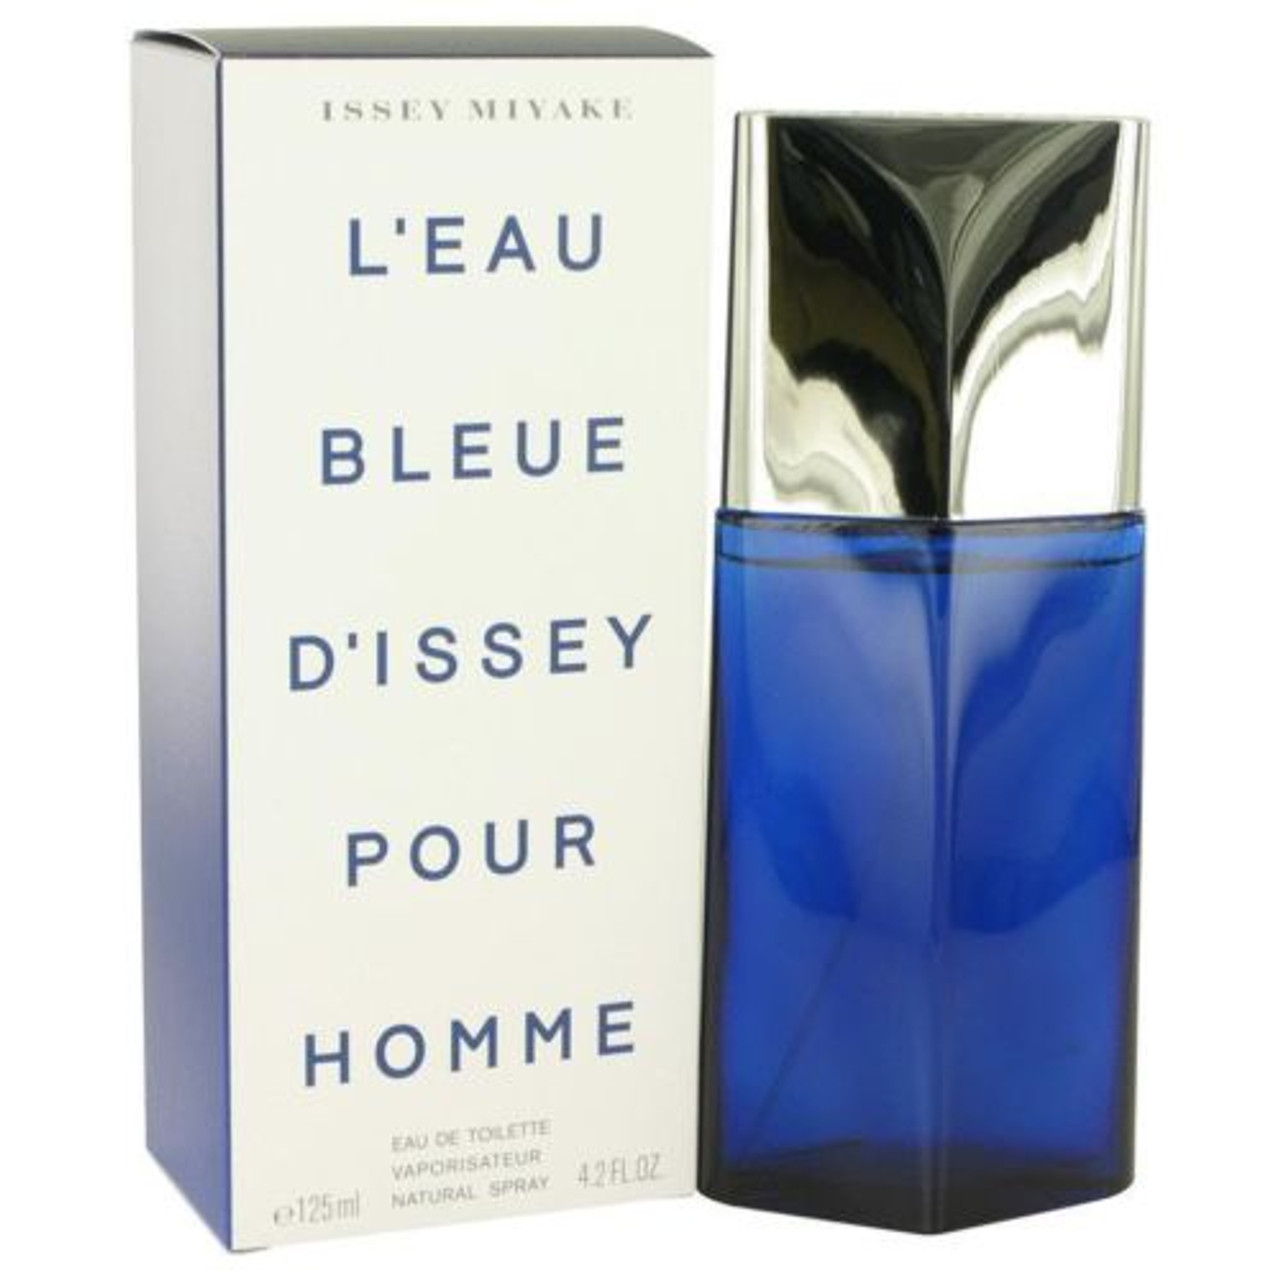 L'eau Bleue D'issey Pour Homme by Issey Miyake 4.2 oz EDT for men ...